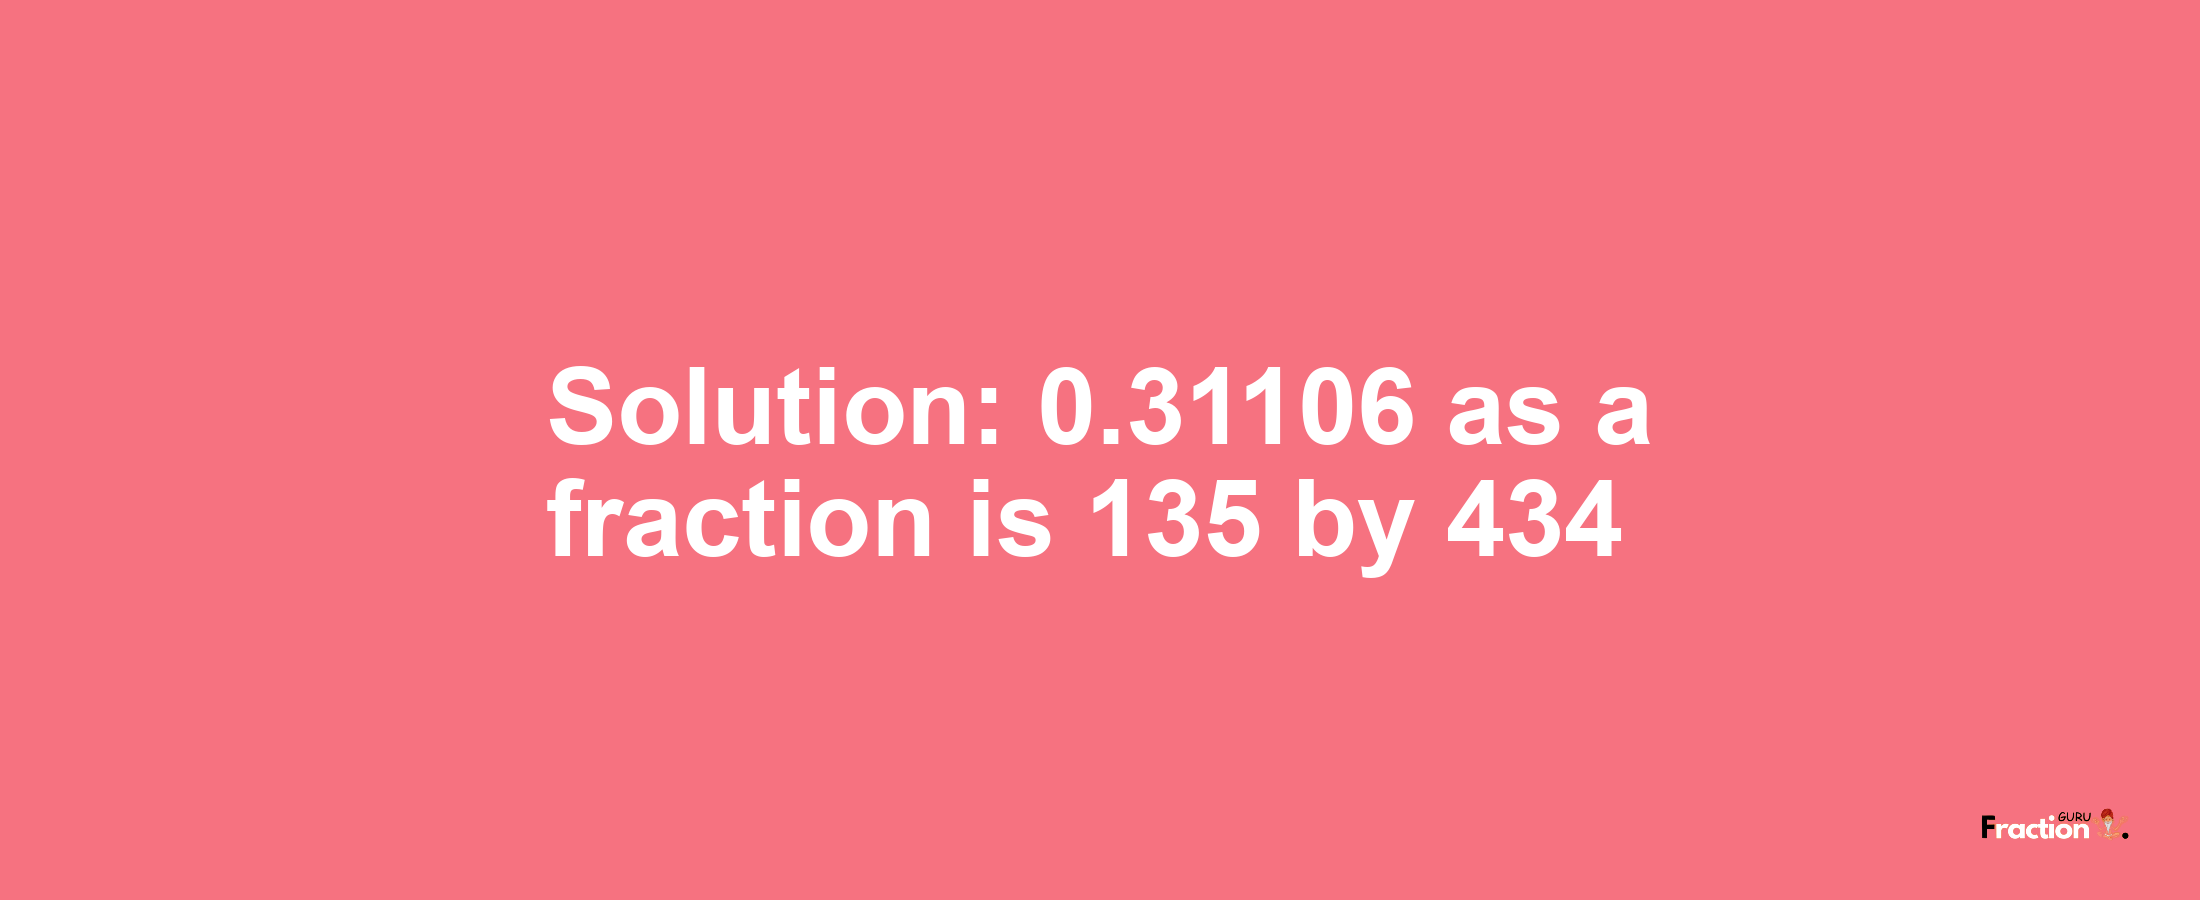 Solution:0.31106 as a fraction is 135/434